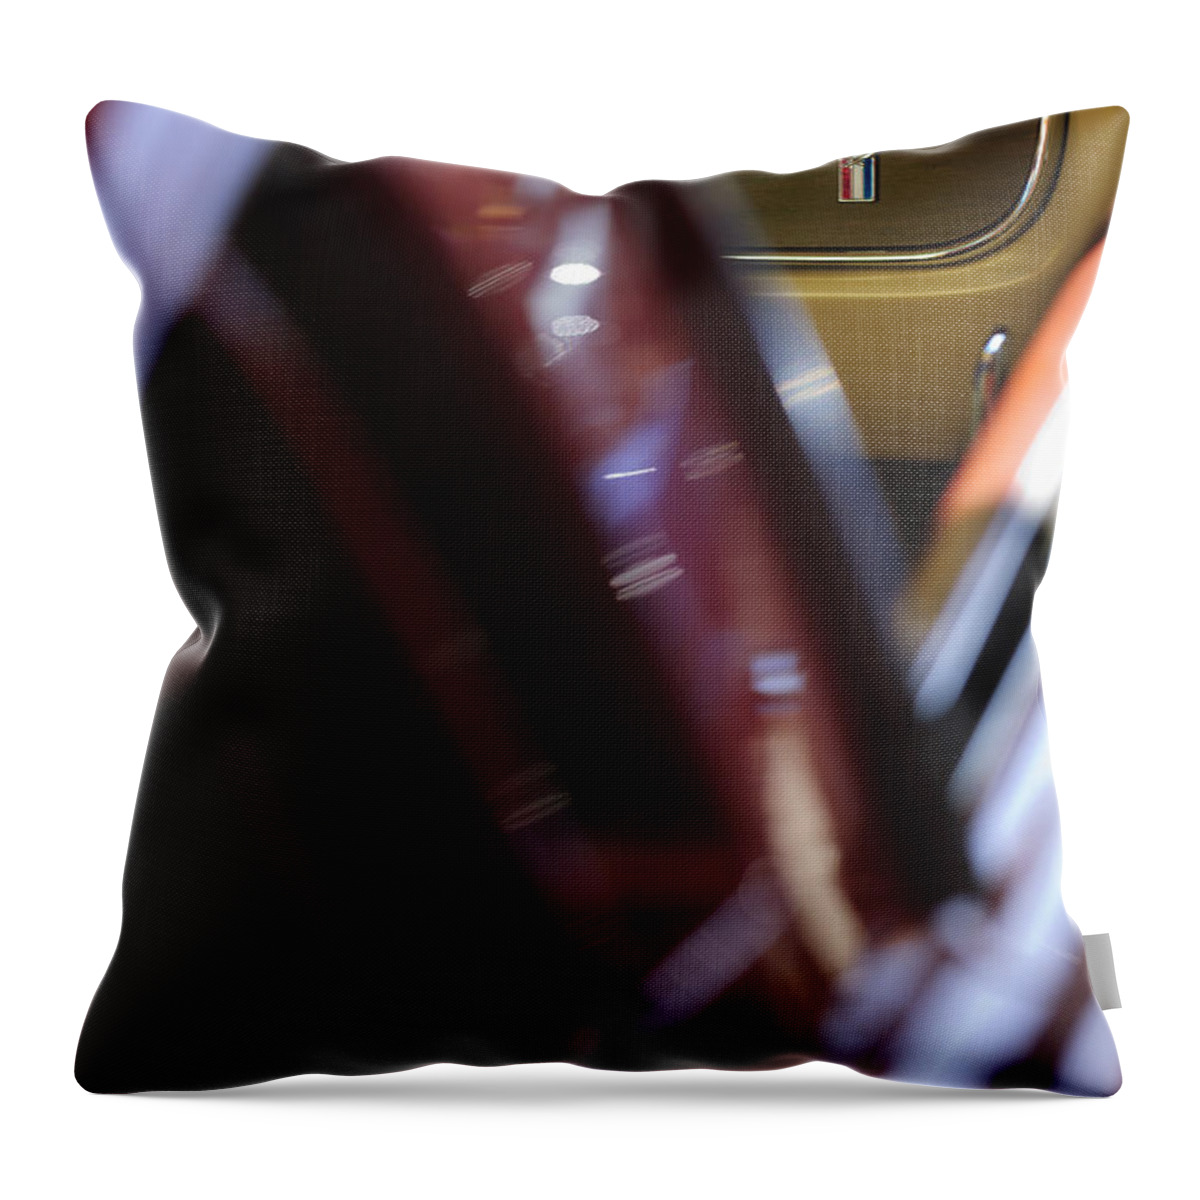 Ford Mustang Emblem Throw Pillow featuring the photograph Ford Mustang Emblem #1 by Jill Reger